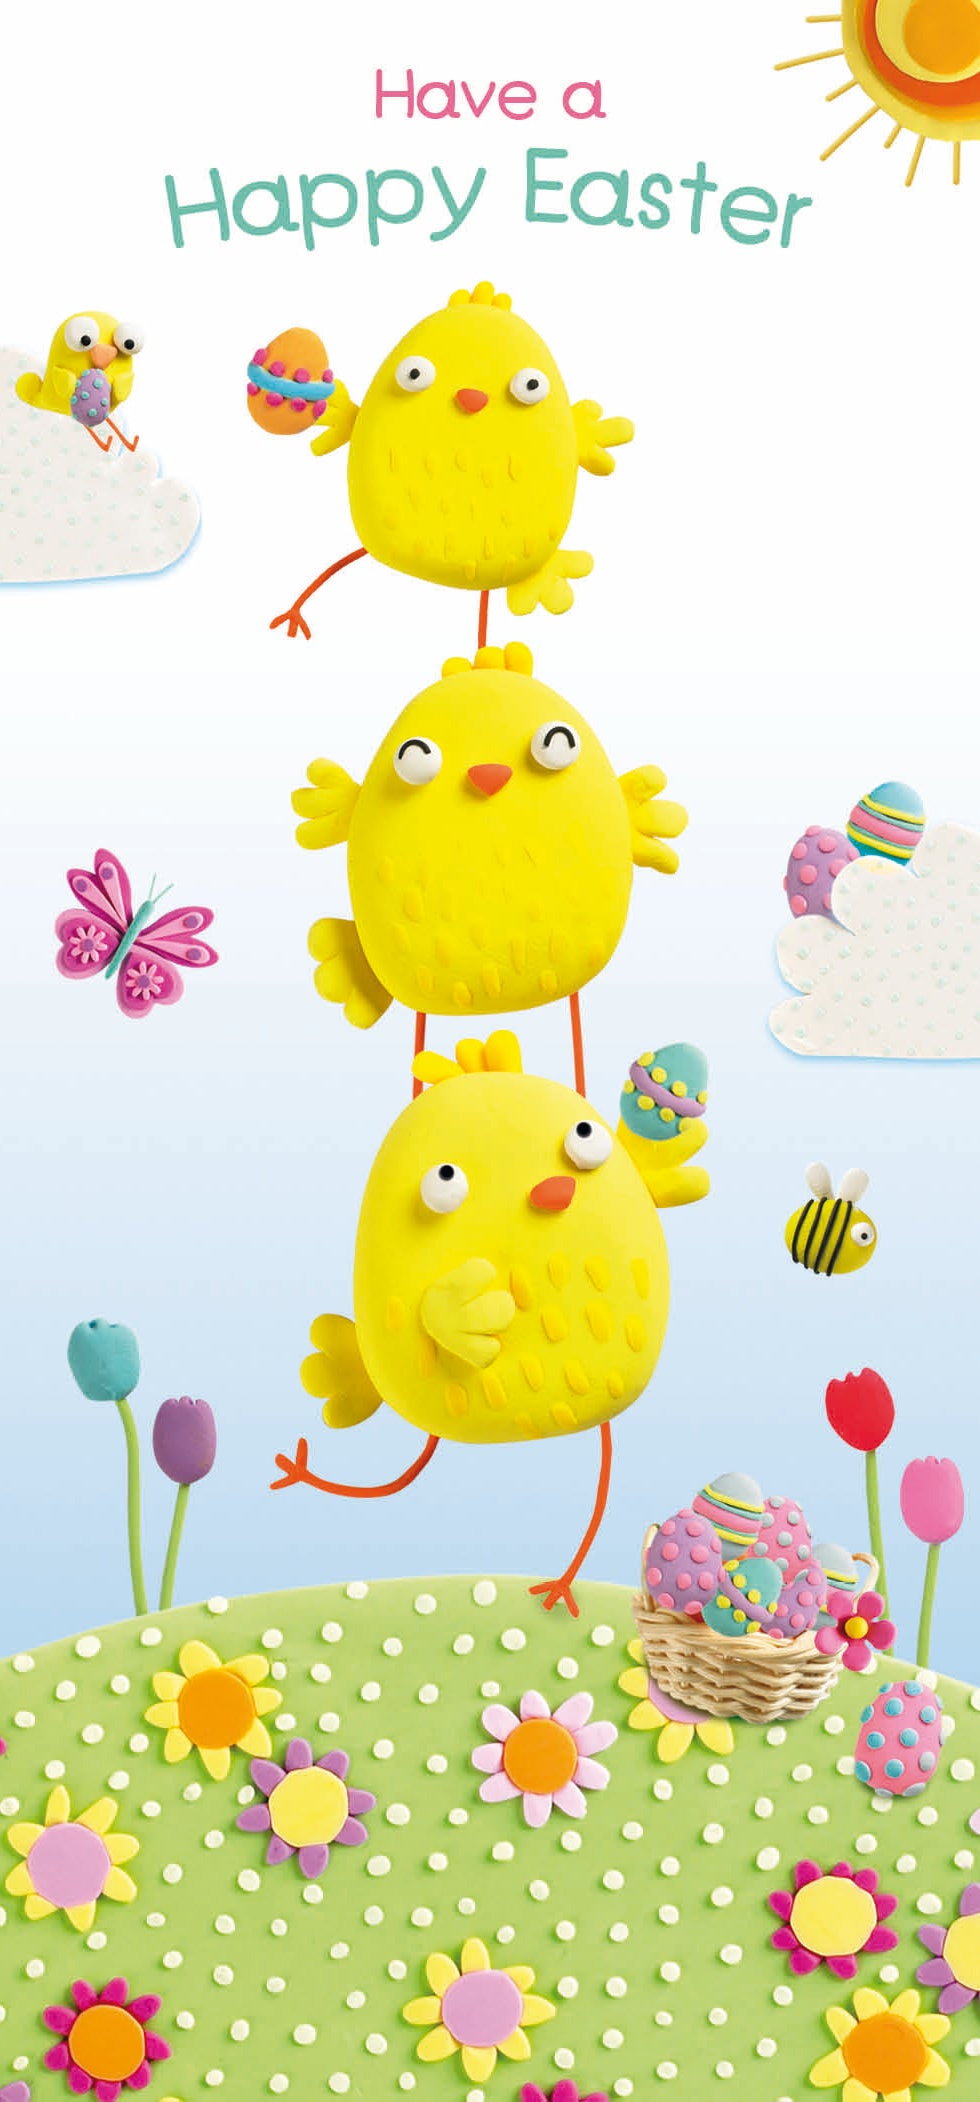 Chick Tower Easter Gift Wallet Card by penny black